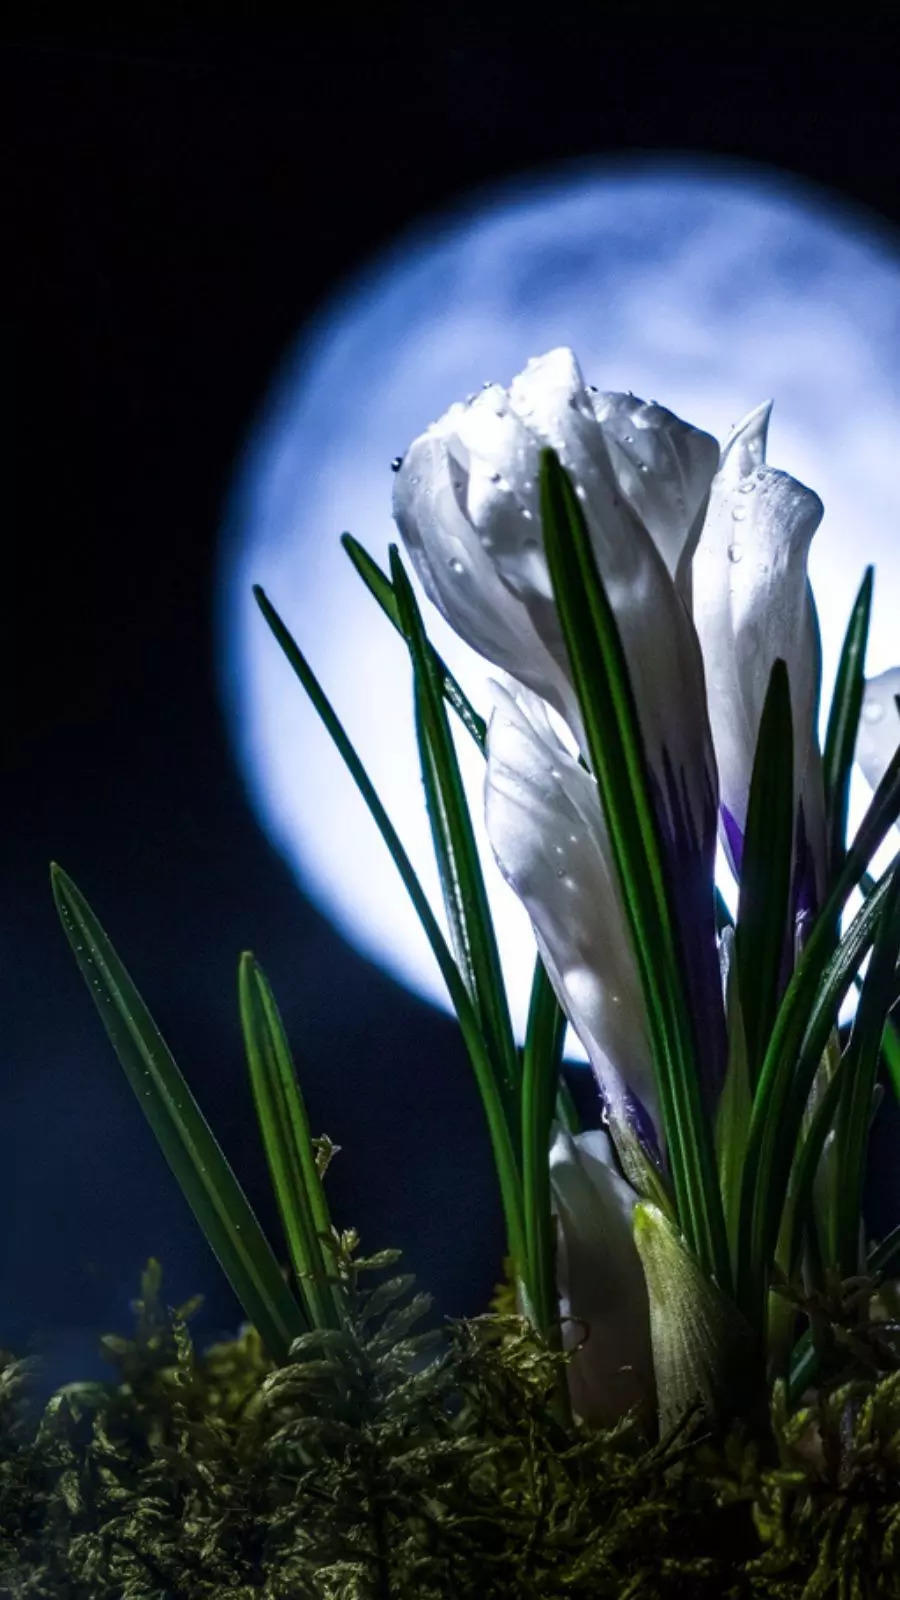 White And Silver Flowering Plants For Your Moon Garden